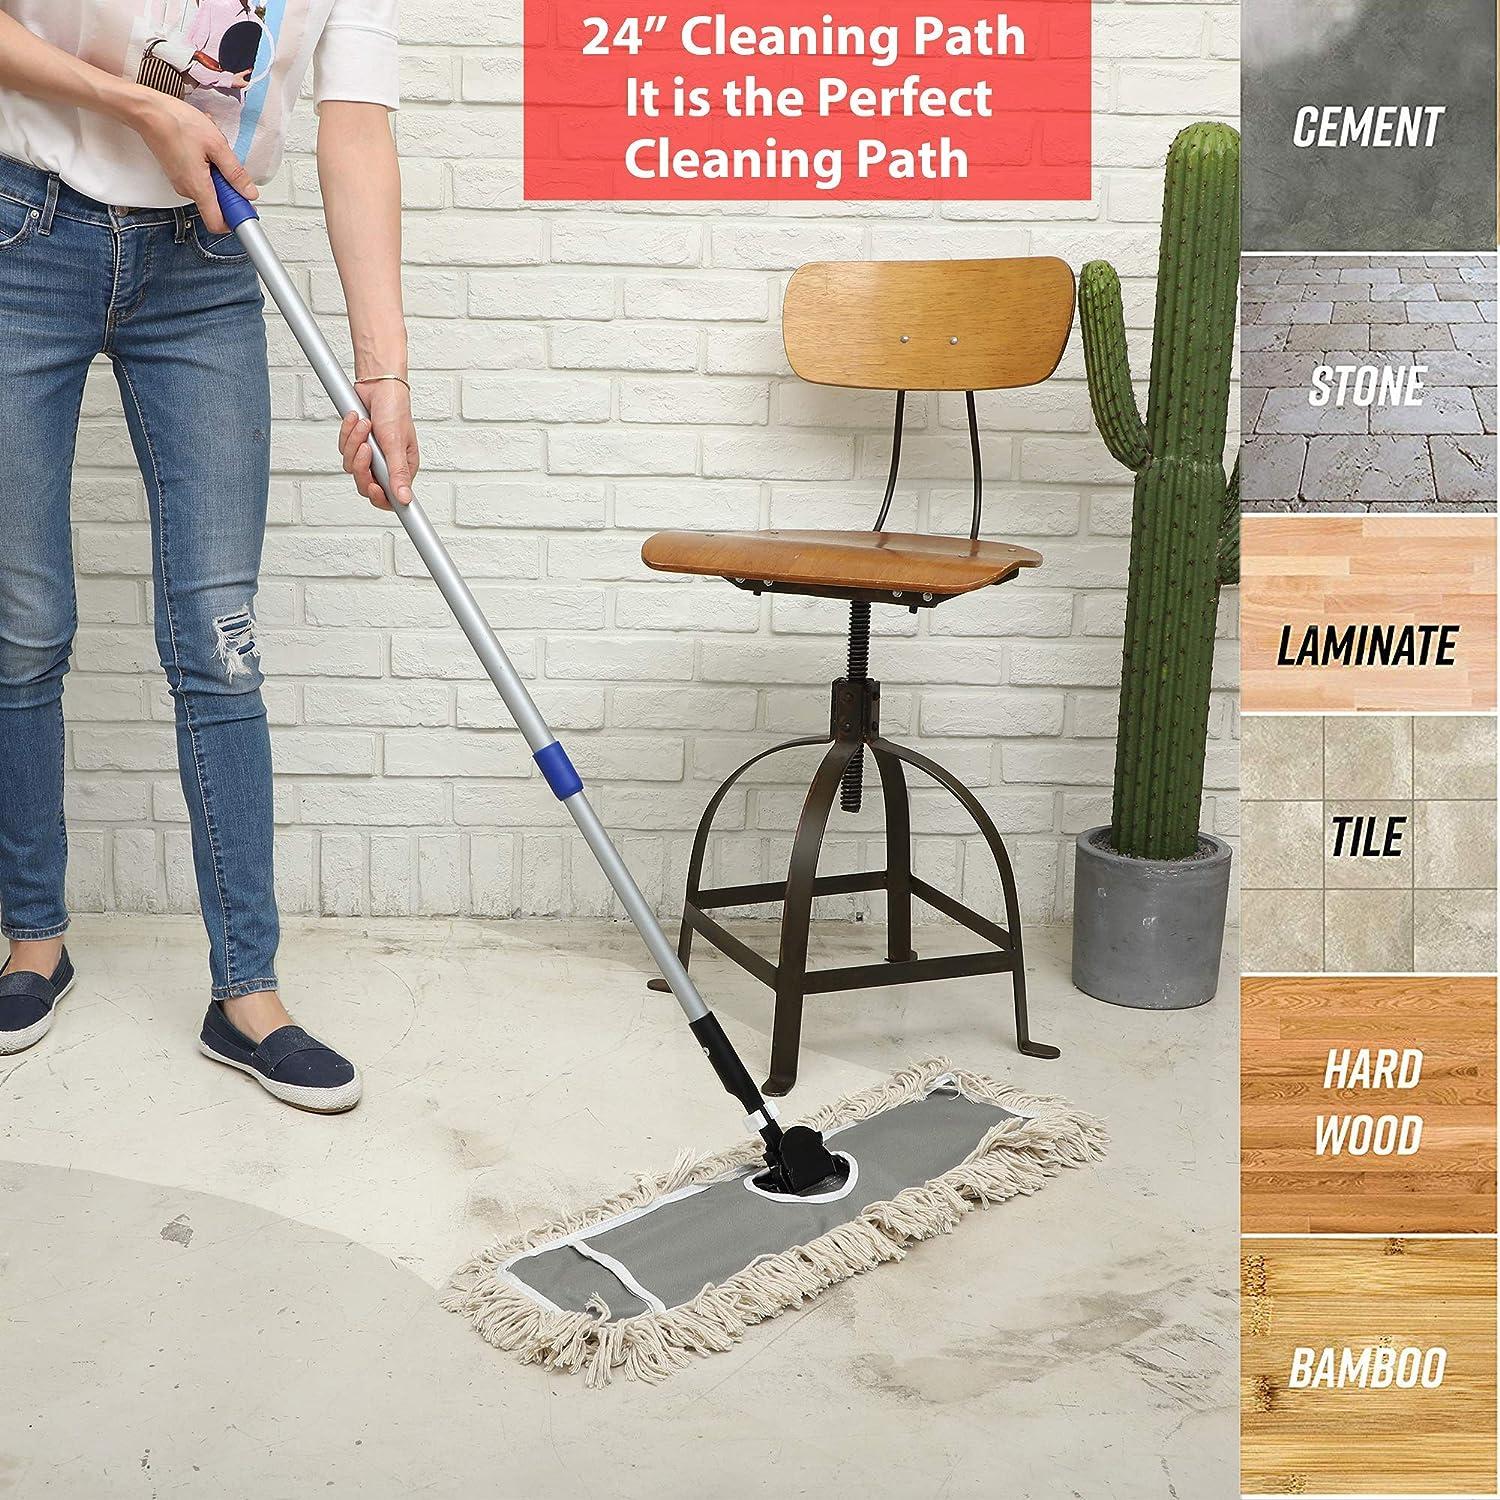  JINCLEAN 24 Industrial Cotton Floor Dust Mop with adjustable  Steel Handle - Commercial Mops for Hardwood, Tiles, Laminate, Vinyl, Garage  epoxy, Bamboo surface cleaning and Flooring Push Dust Broom : Industrial